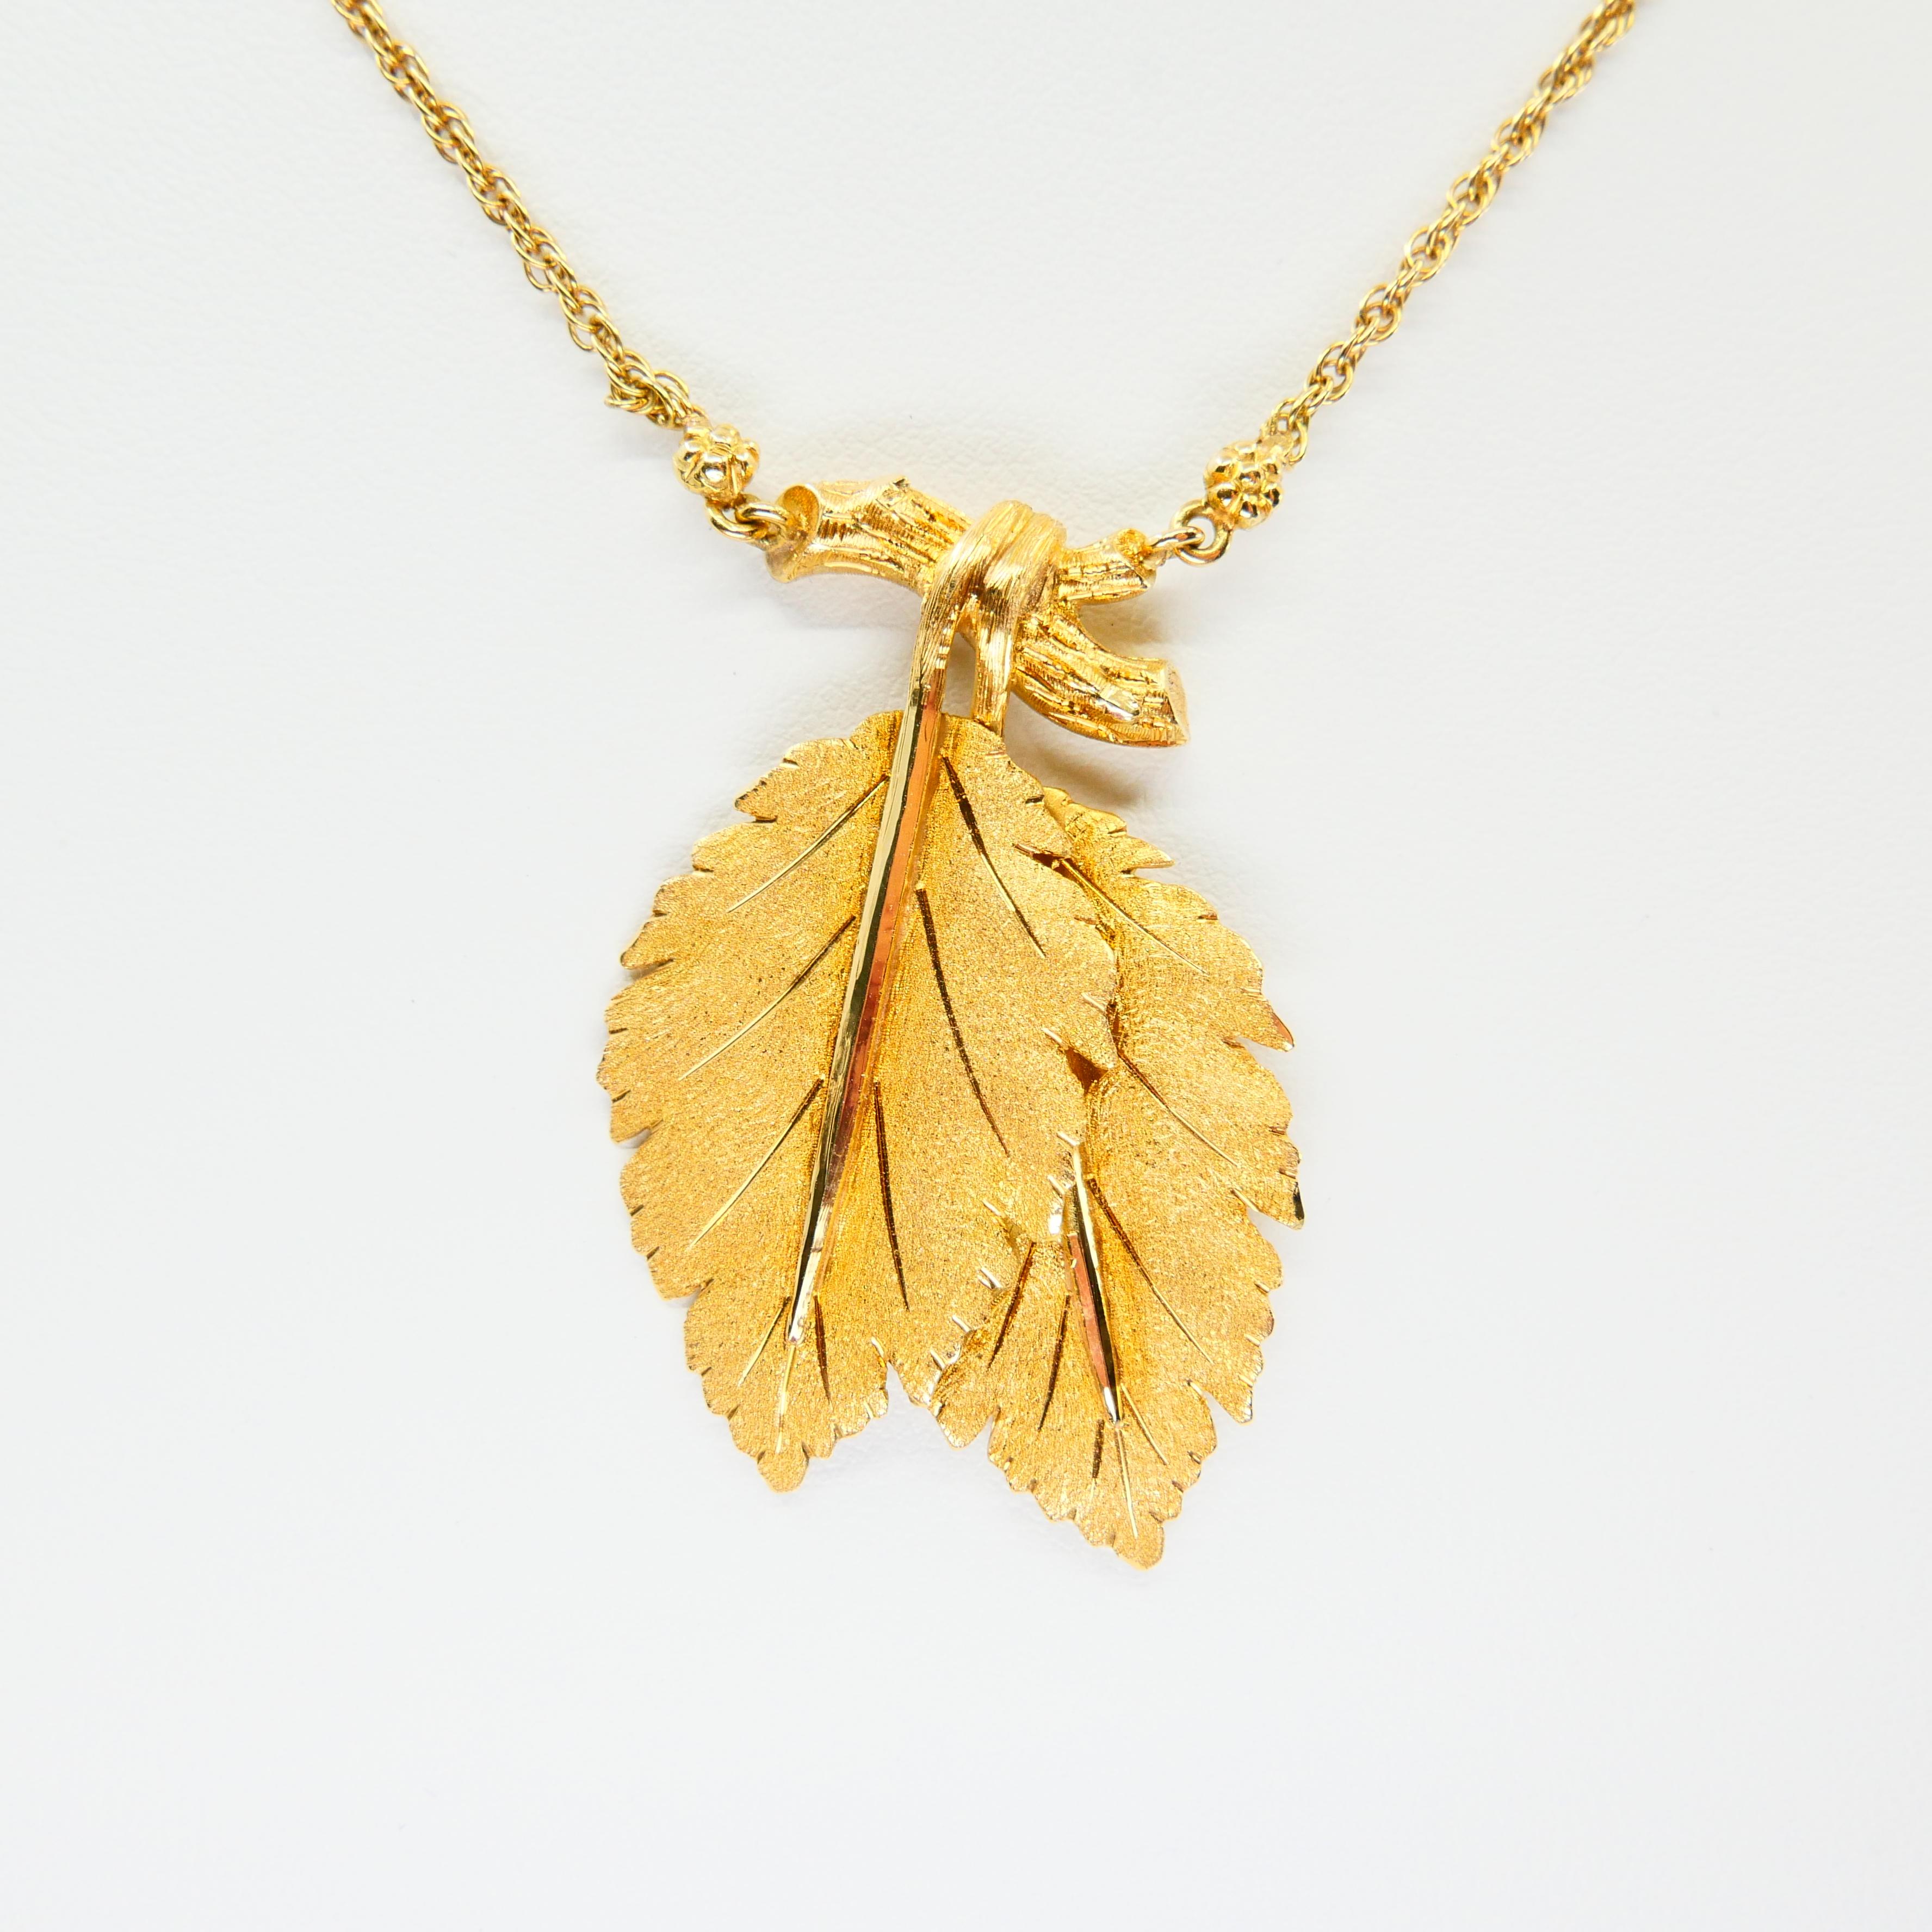 Women's or Men's Buccellati, Federico 18K Yellow Gold Leaves and Twigs Pendant Drop Necklace 